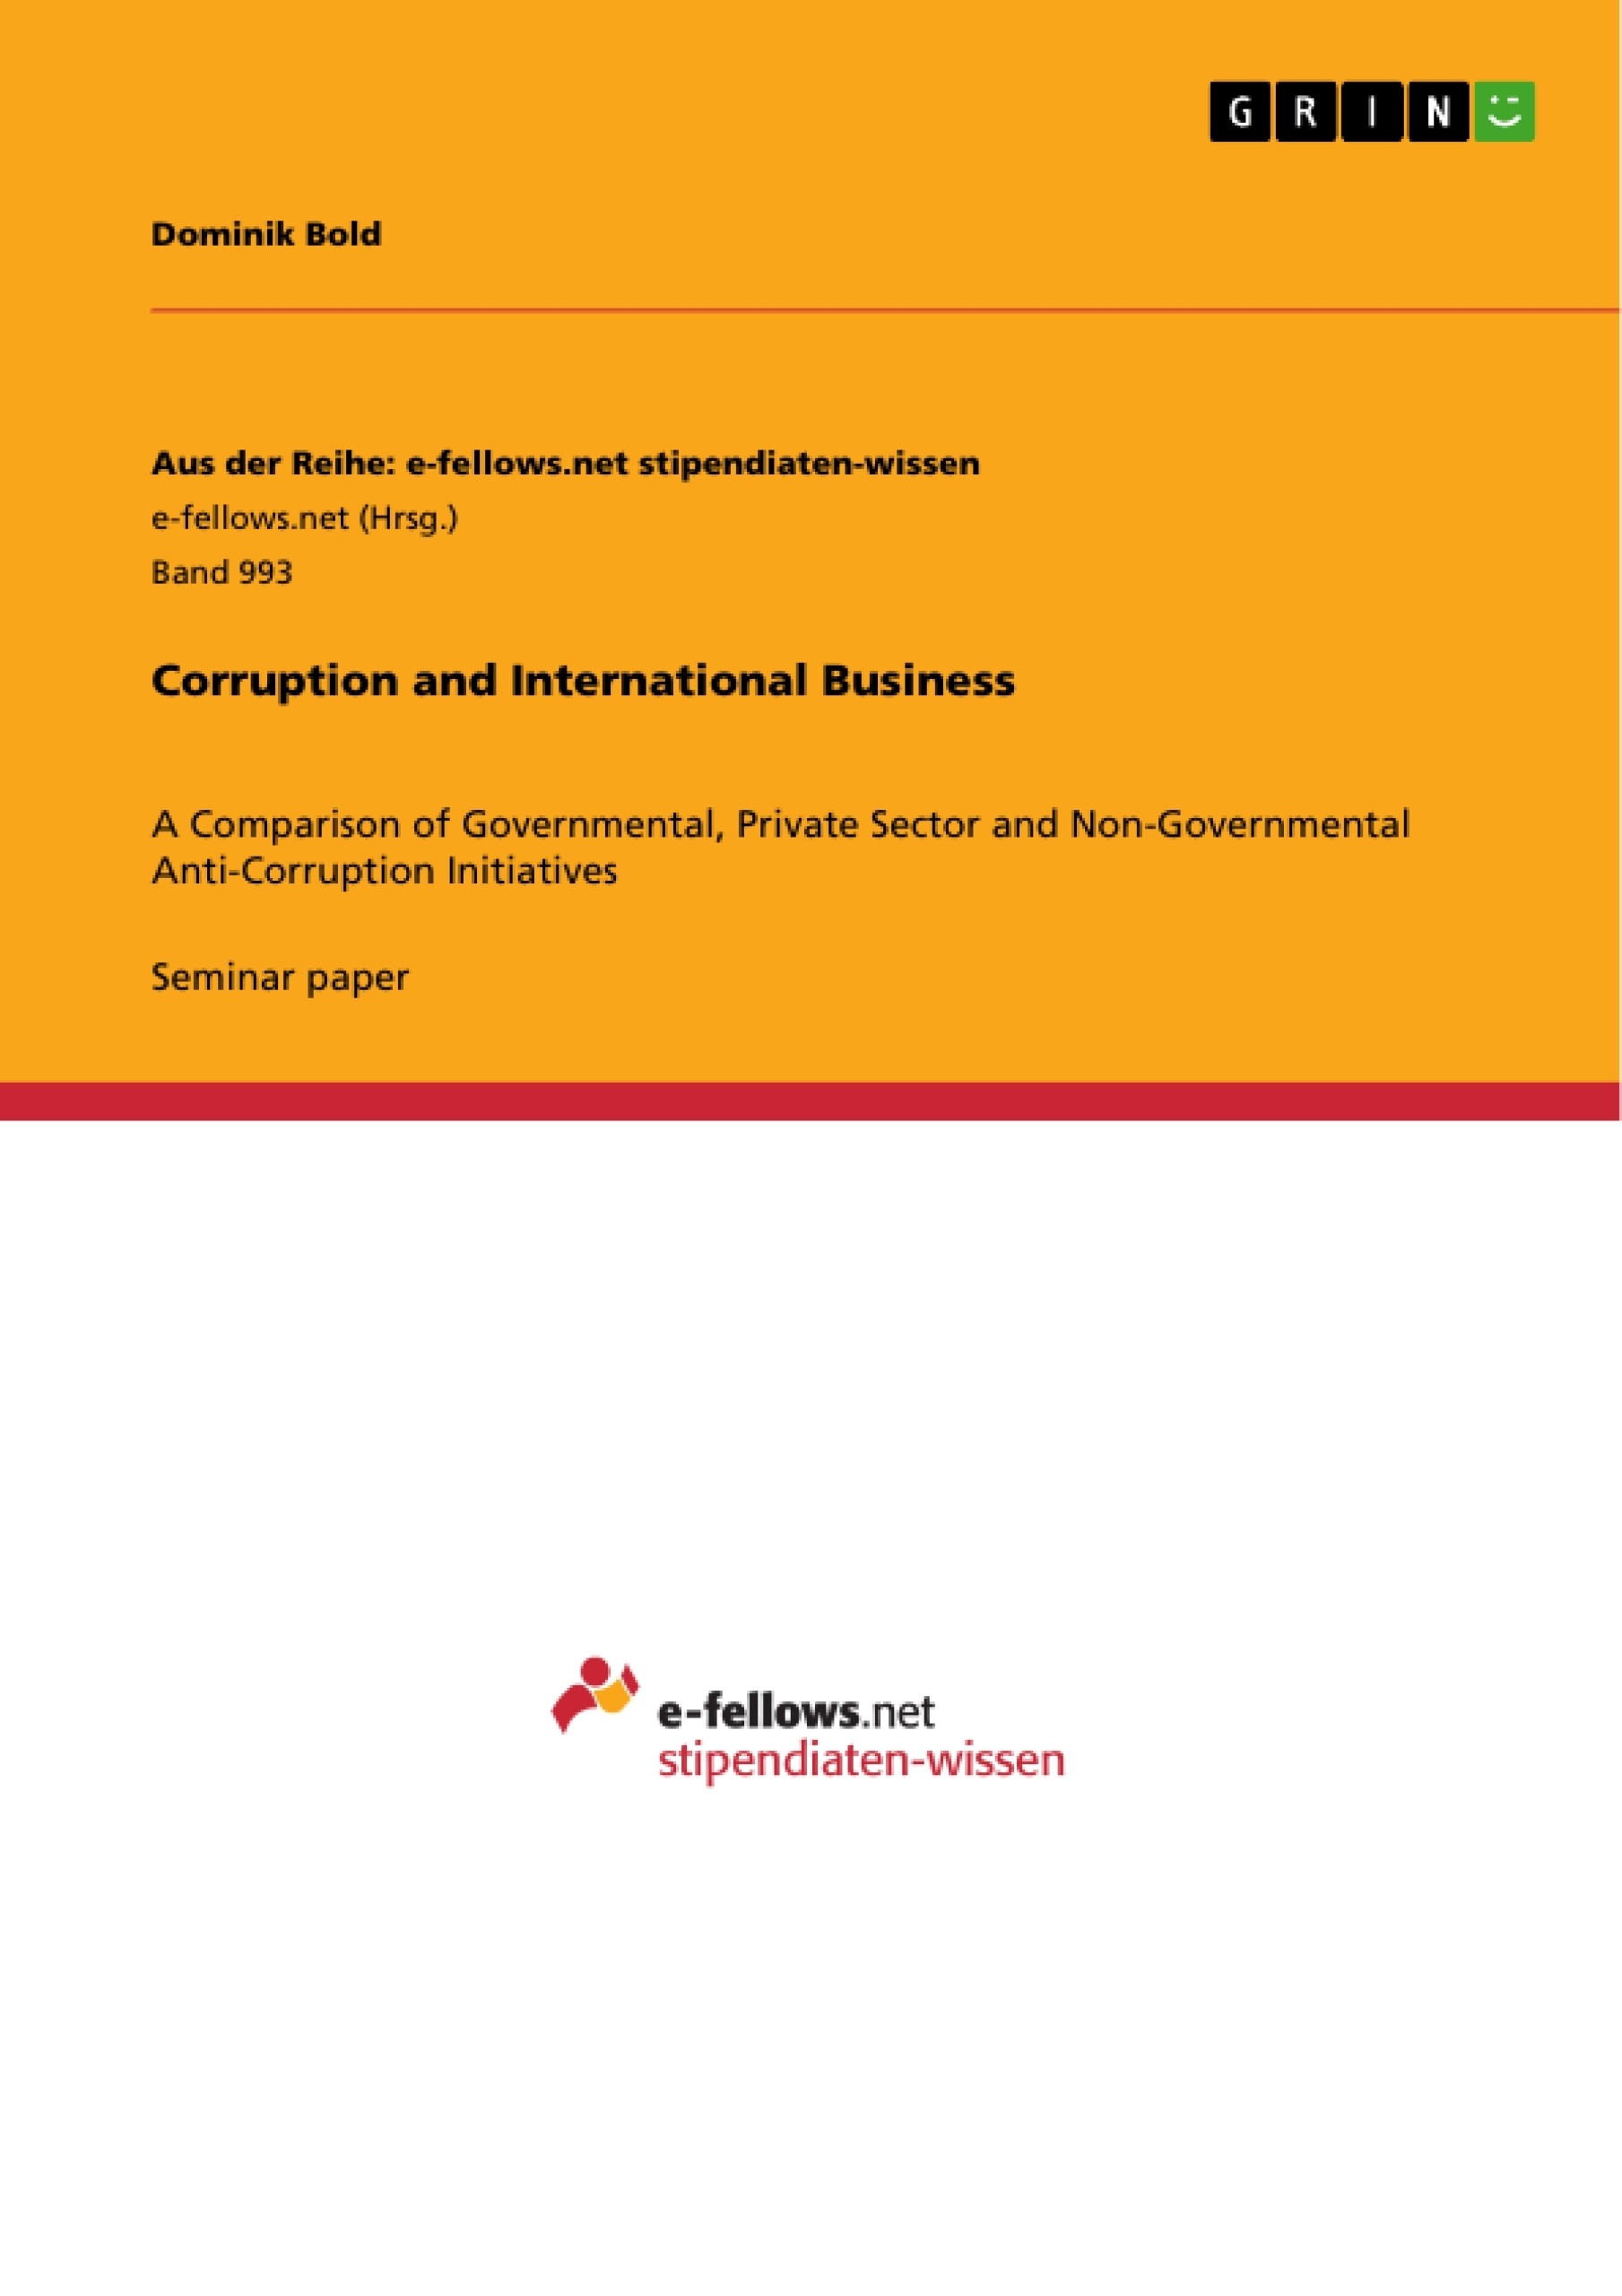 Title: Corruption and International Business